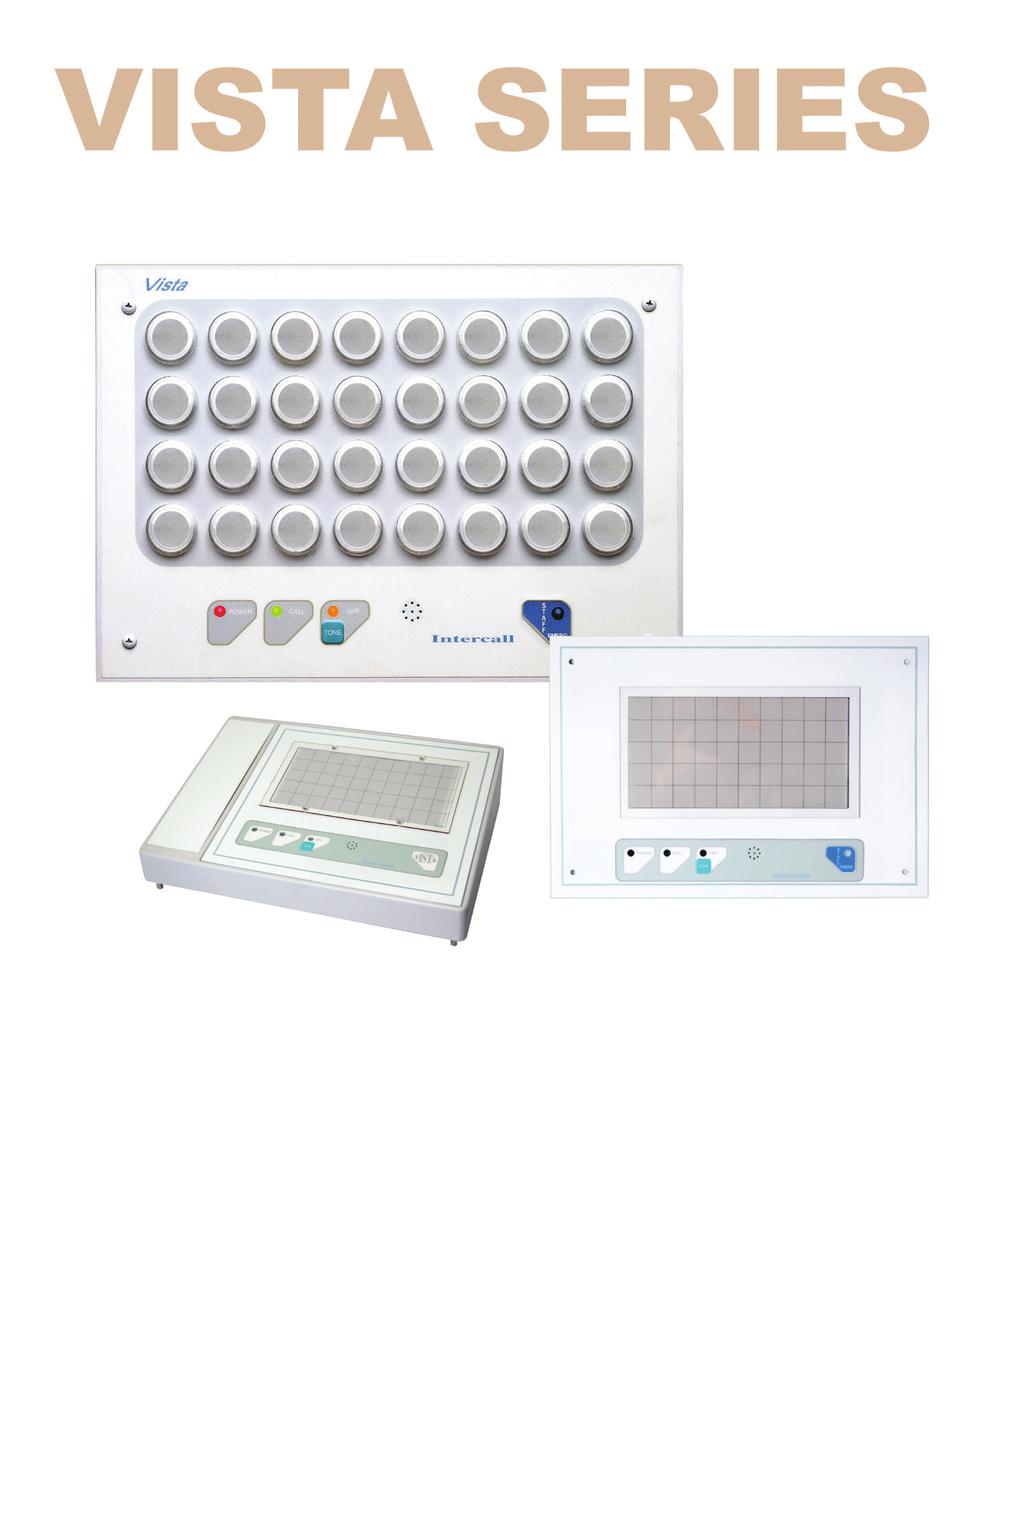 TOTAL RELIABILITY The Vista series is a visual-tone nurse call system with annunciator panel master stations.